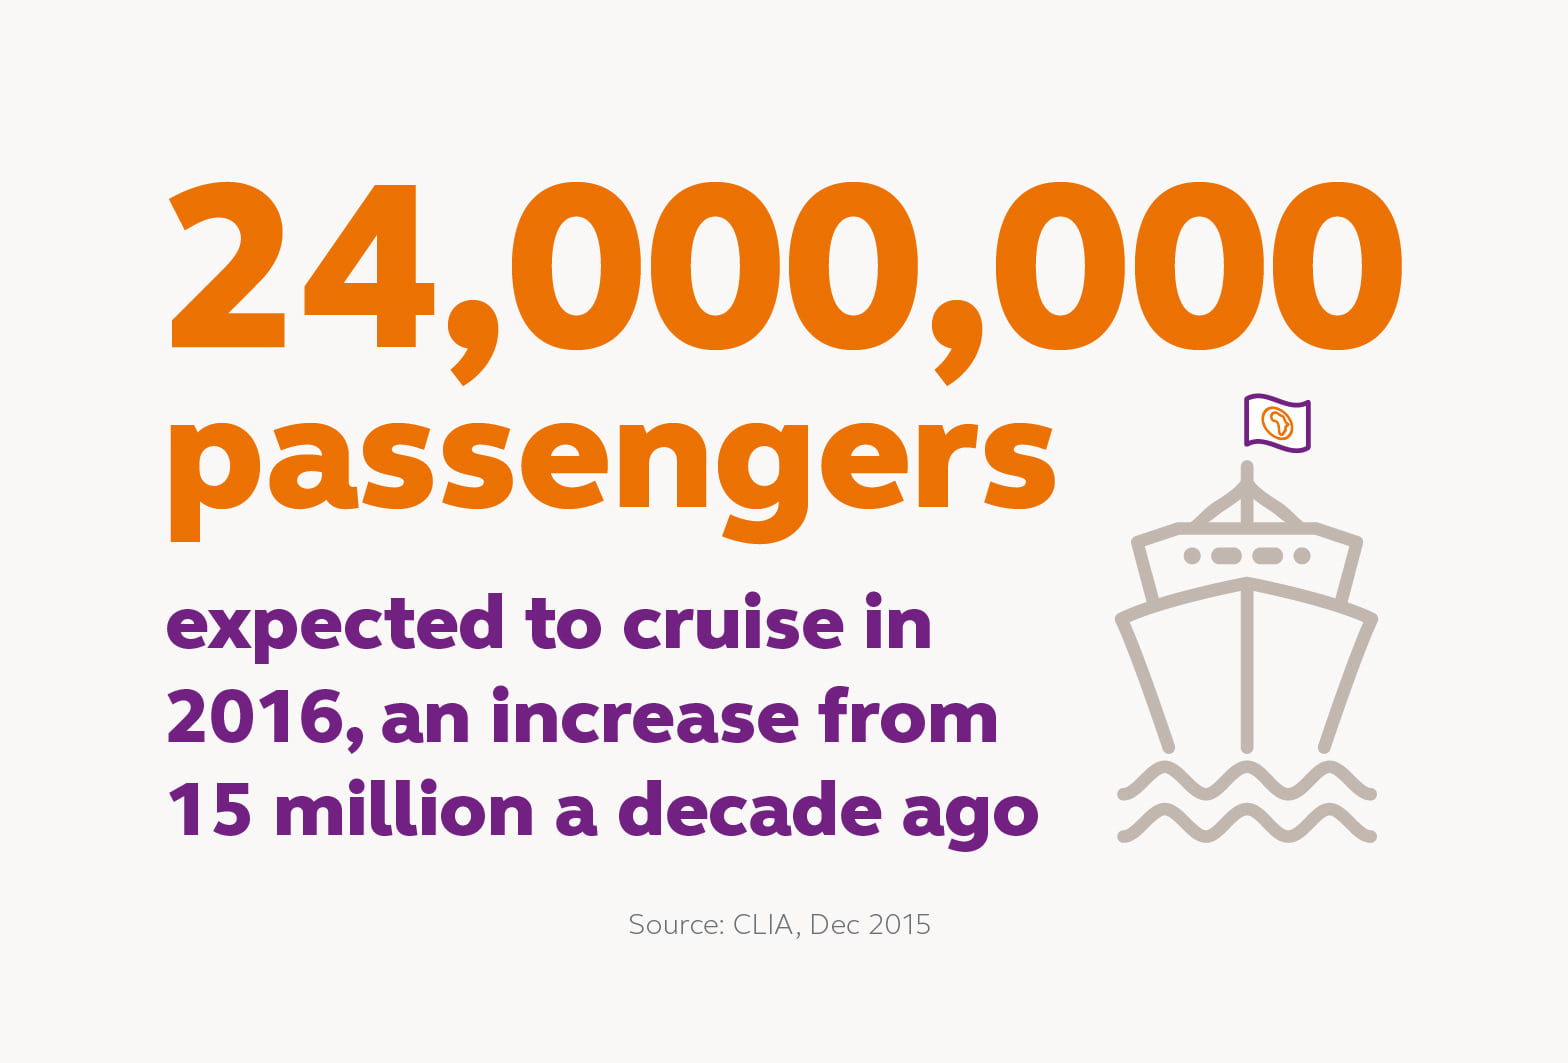 24,000,000 passengers expected to cruise in 2016, up from 15 million a decade ago